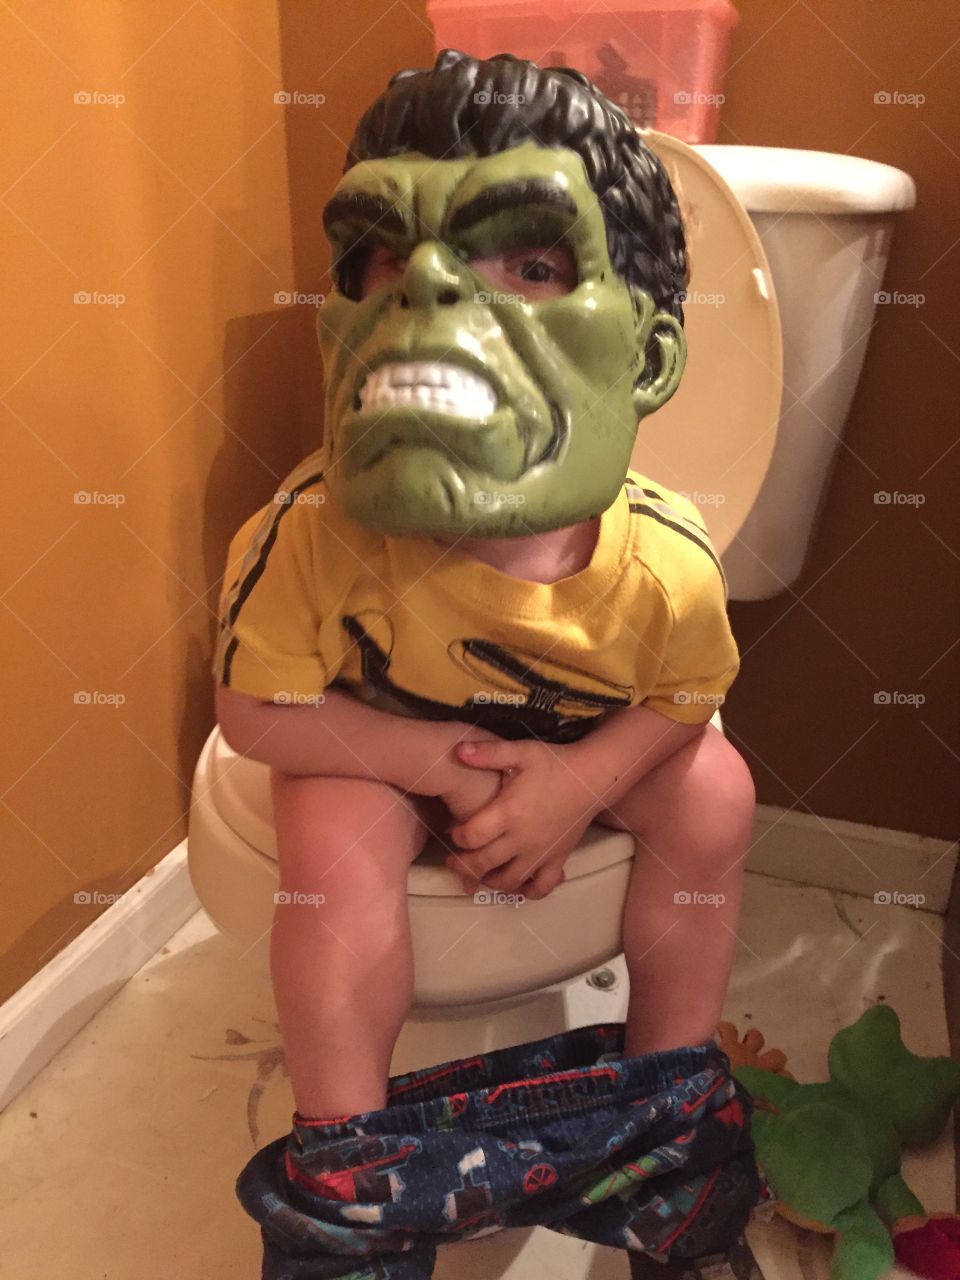 Even the Incredible Hulk takes potty breaks!